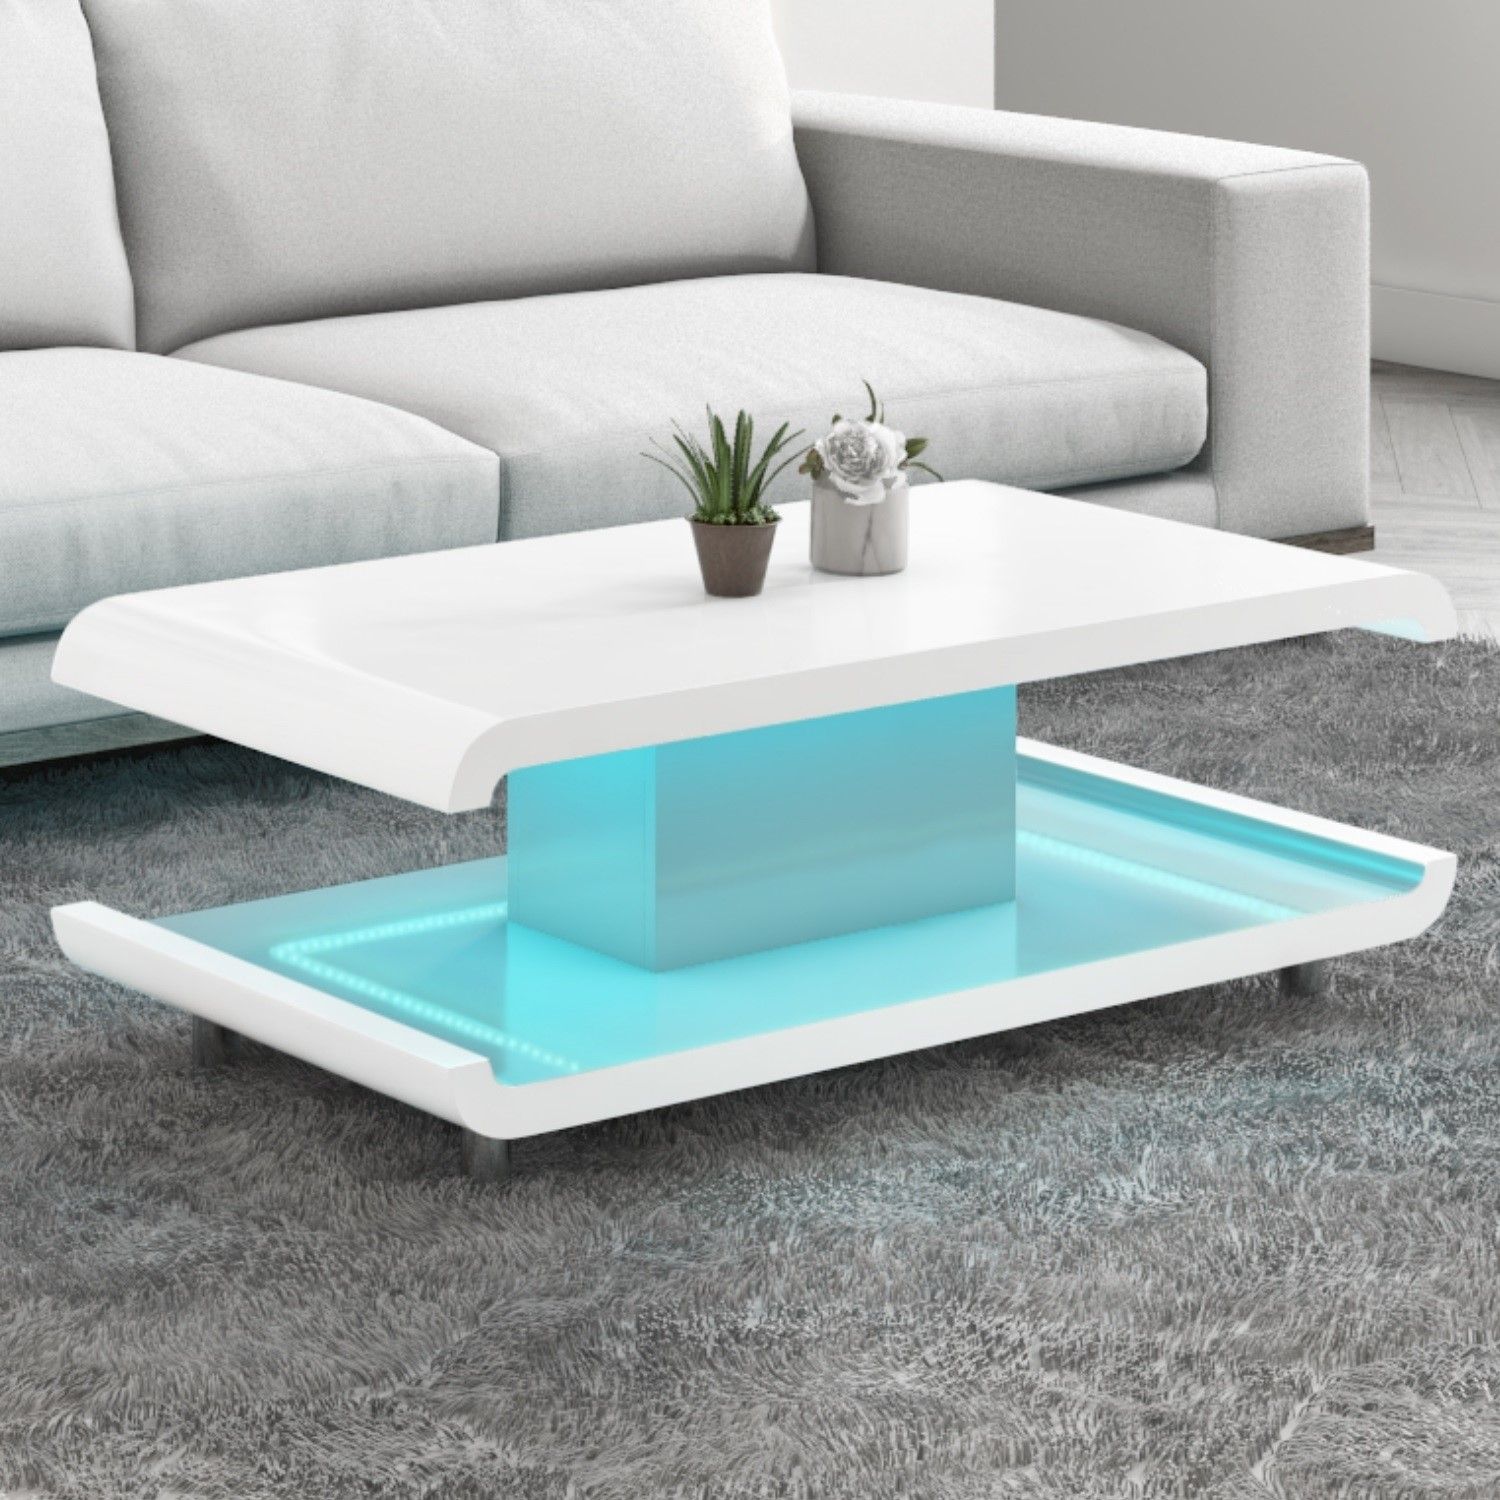 High Gloss White Coffee Table Led Range | Offer Of The Day Throughout Coffee Tables With Led Lights (View 7 of 20)